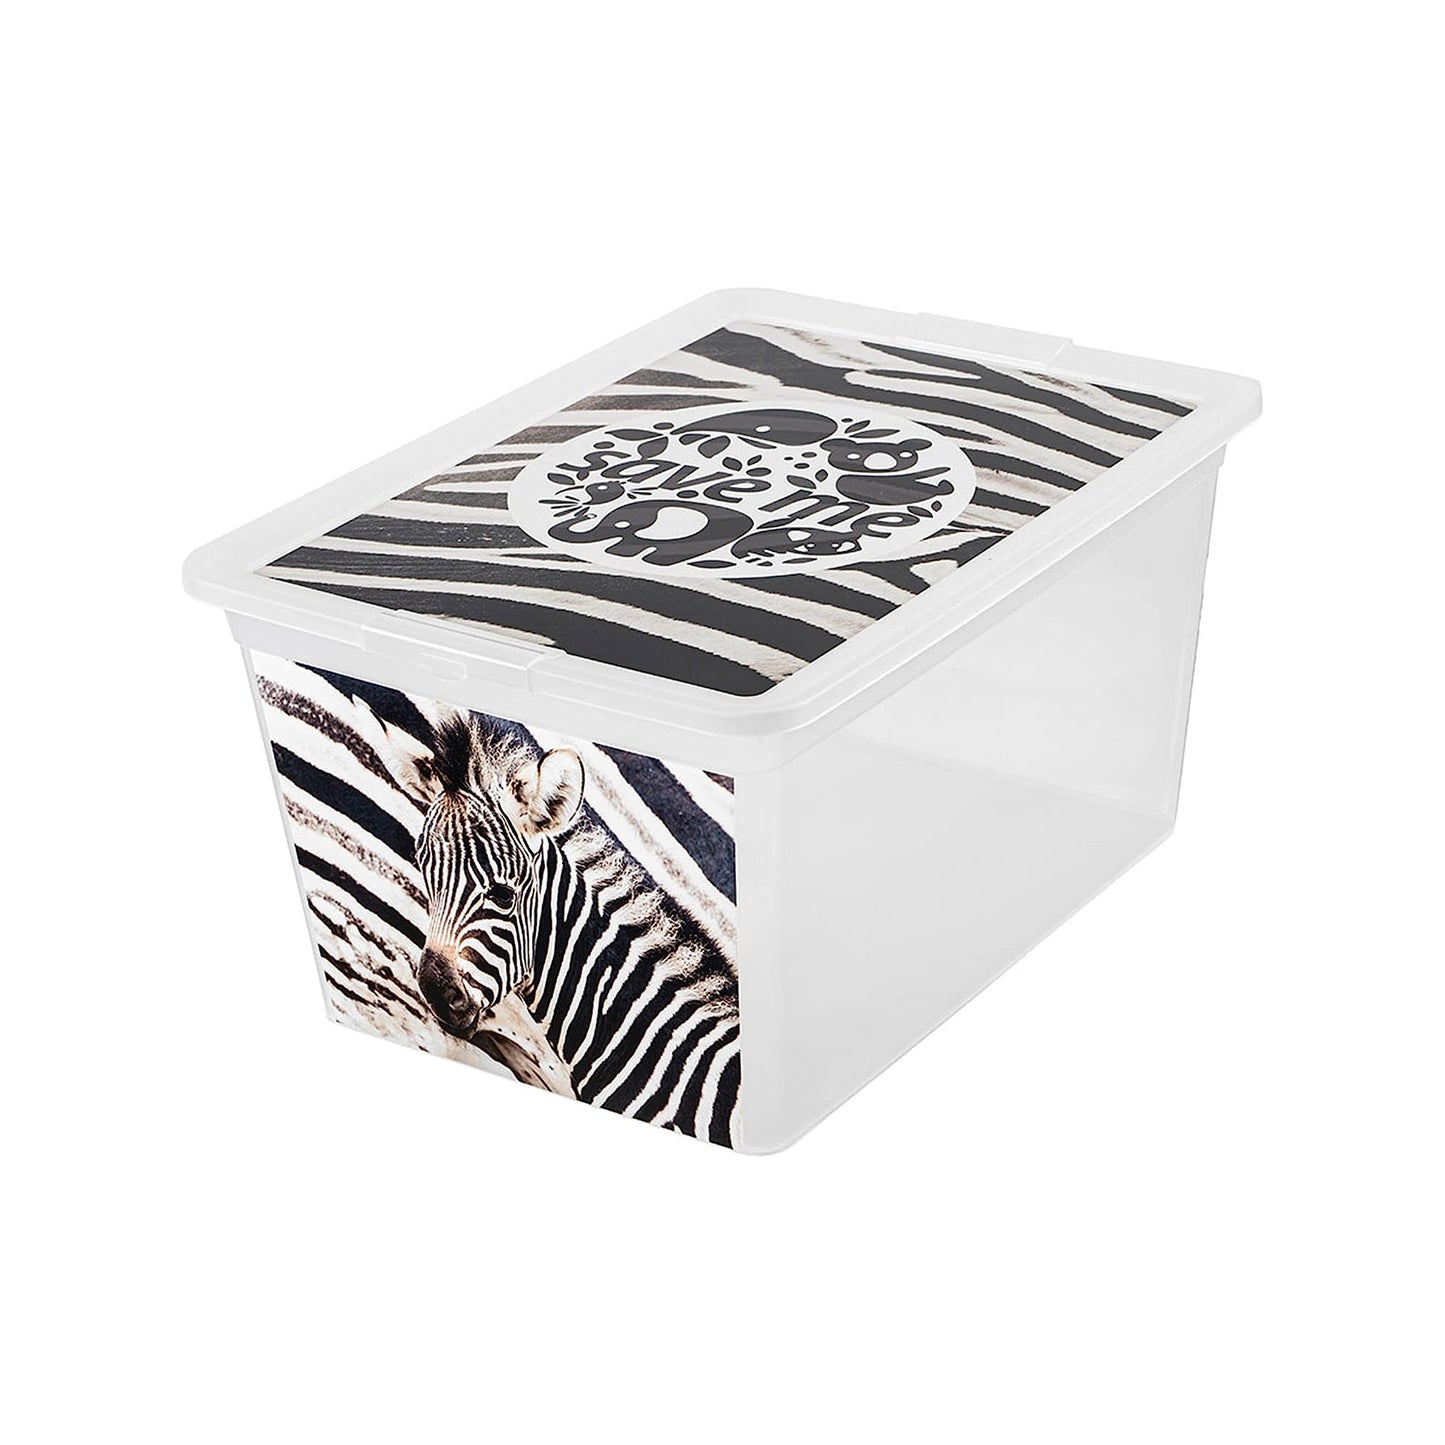 30 Litre Printed Animal Save Me Boxes Strong Stackable Storage Containers With Lids